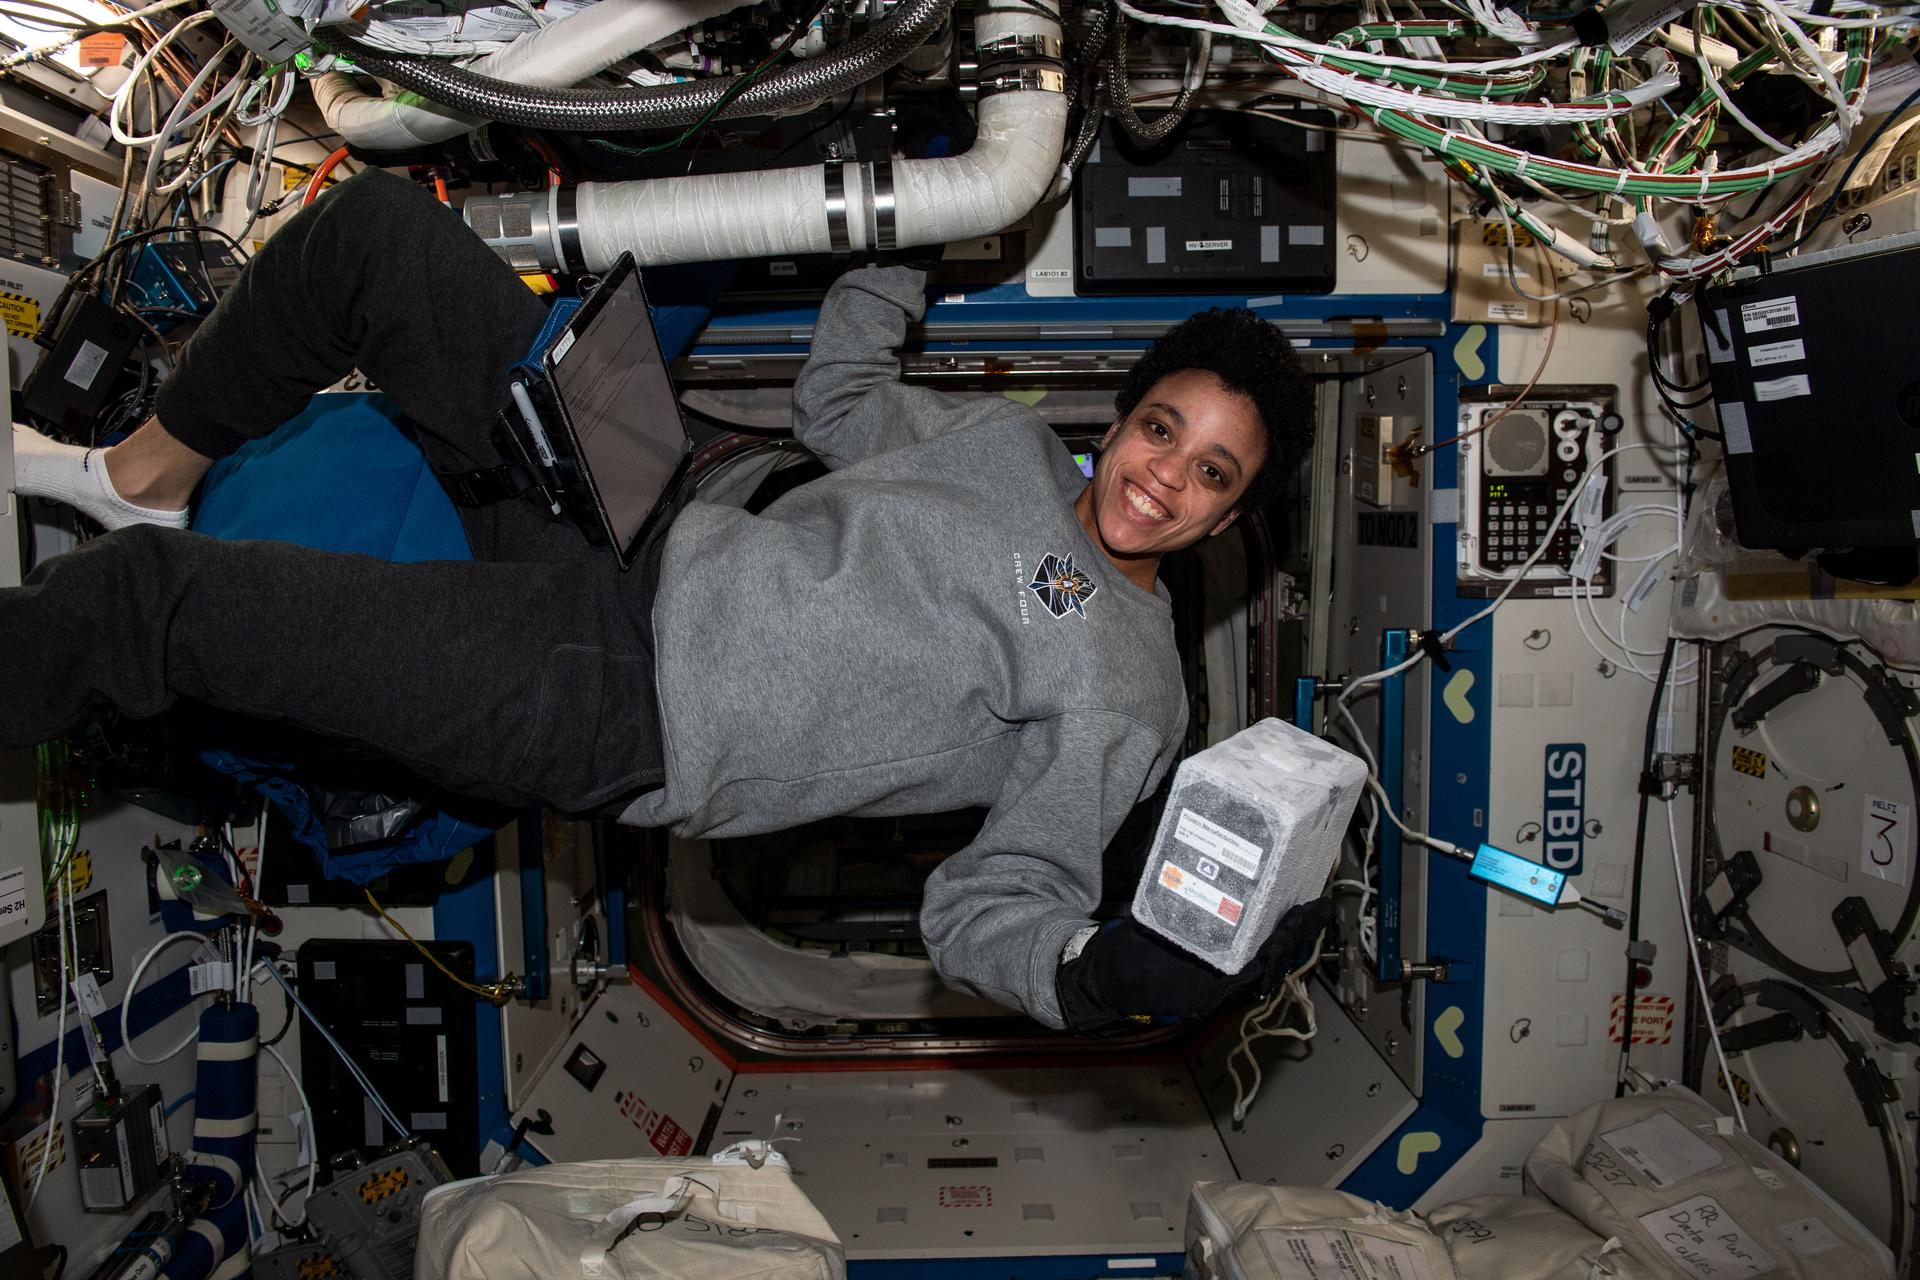 Watkins, smiling at the camera, wears a gray sweatshirt, black pants, and black gloves. She floats in space, holding on to a wall with her right hand and gripping an ice-covered black box about the size of a box of tissues. There is a laptop Velcroed to her leg and a lot of cables over her head.